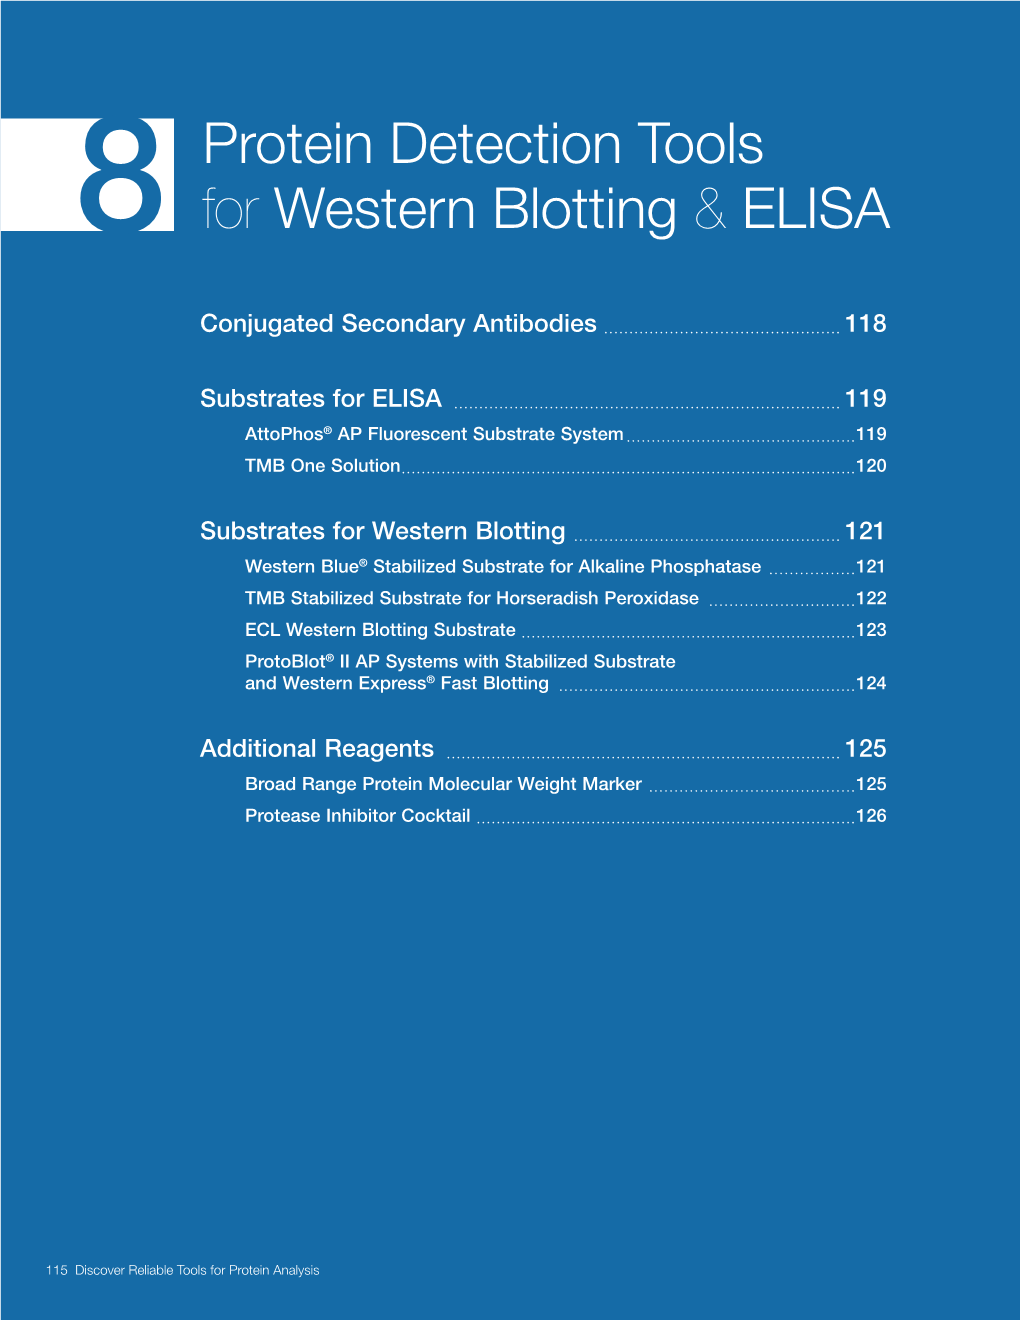 8 Protein Detection Tools for Western Blotting & ELISA